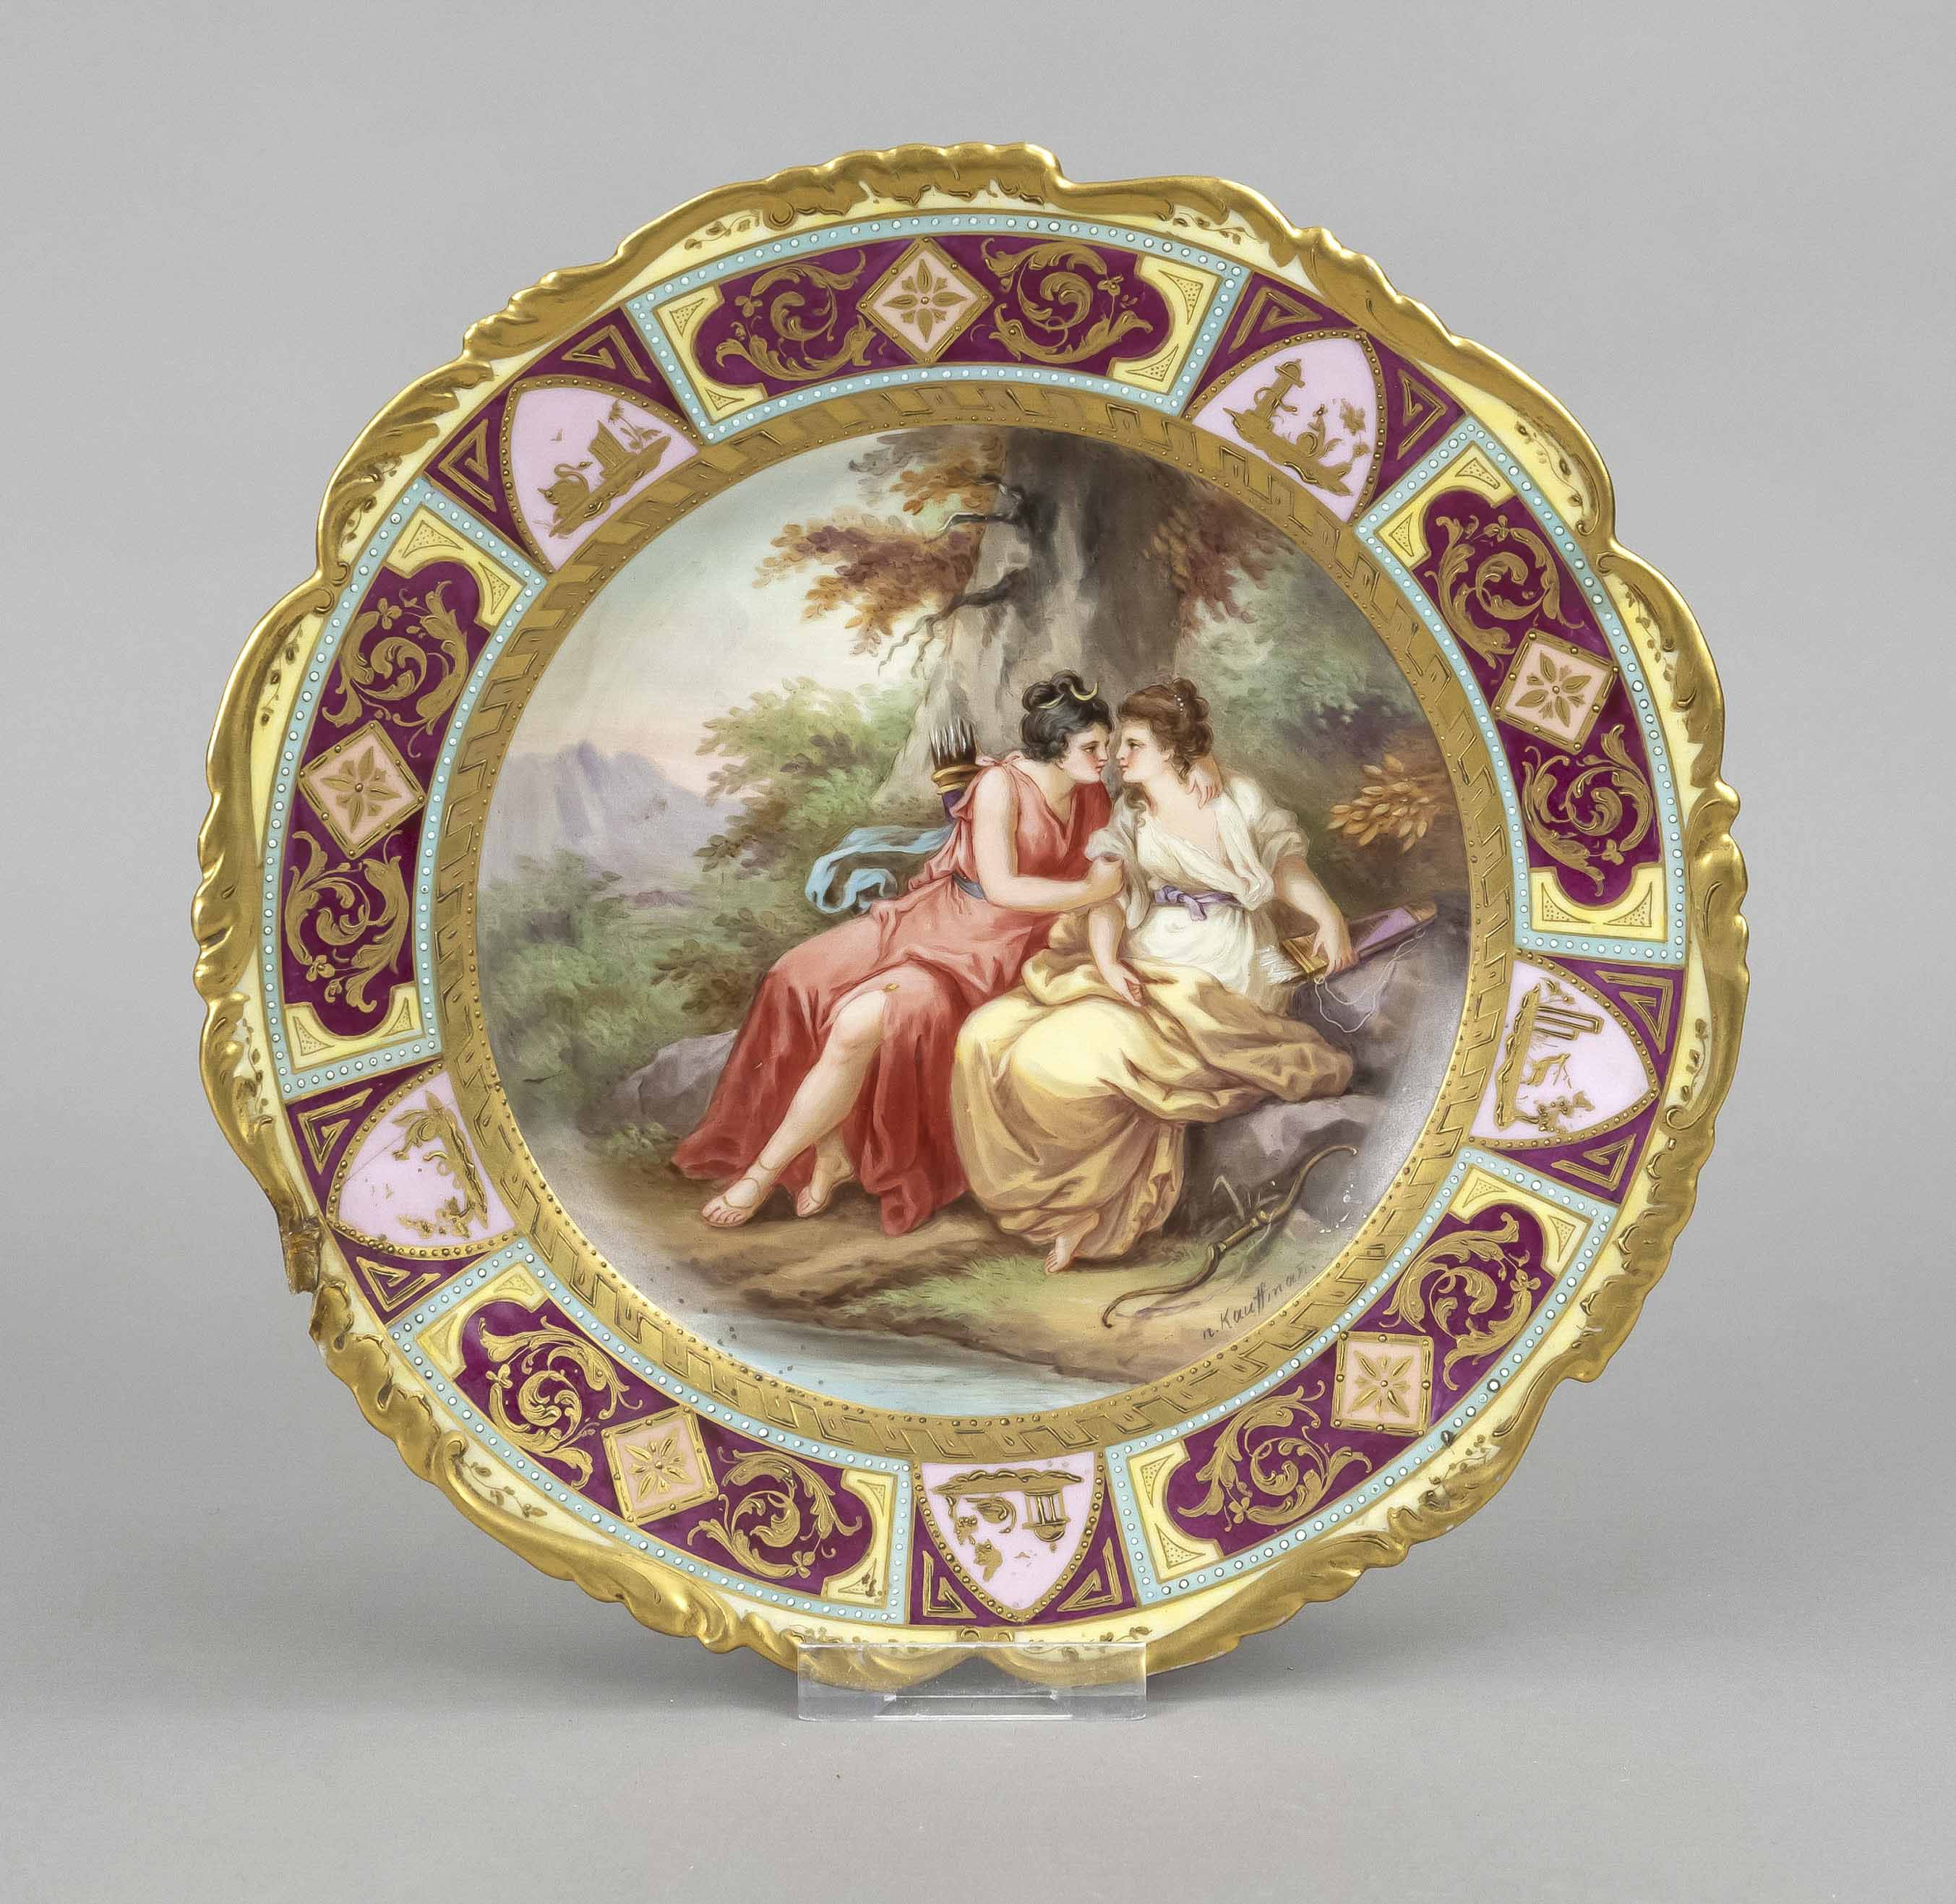 Plate, Thuringia, 20th c., in the mirror fine painting after Angelika Kauffmann, inscribed on the